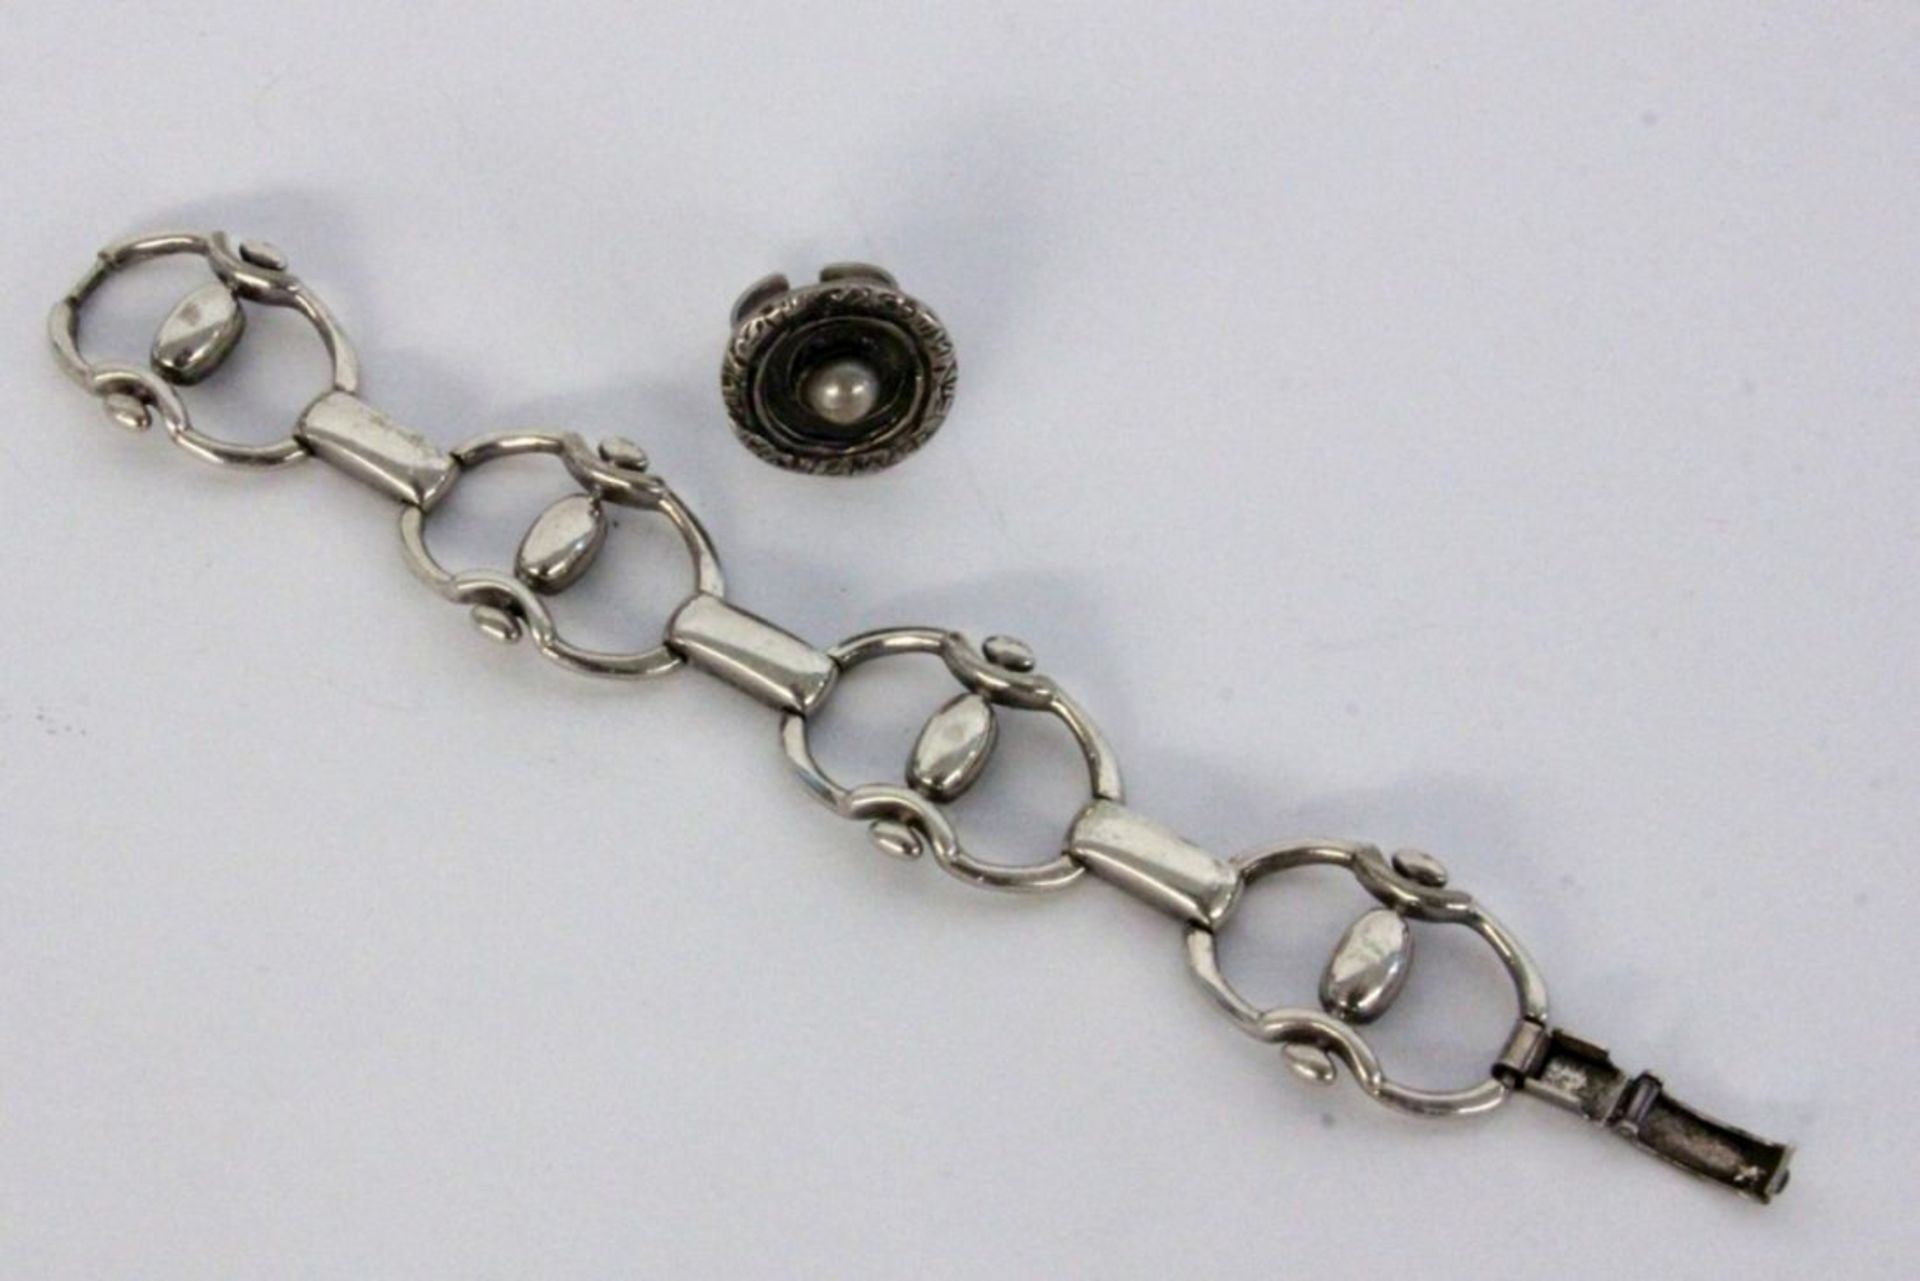 GLIEDERAMBAND UND RING Silber. Brutto ca. 66g A LINK BRACELET AND RING Silver. Gross weight approx.